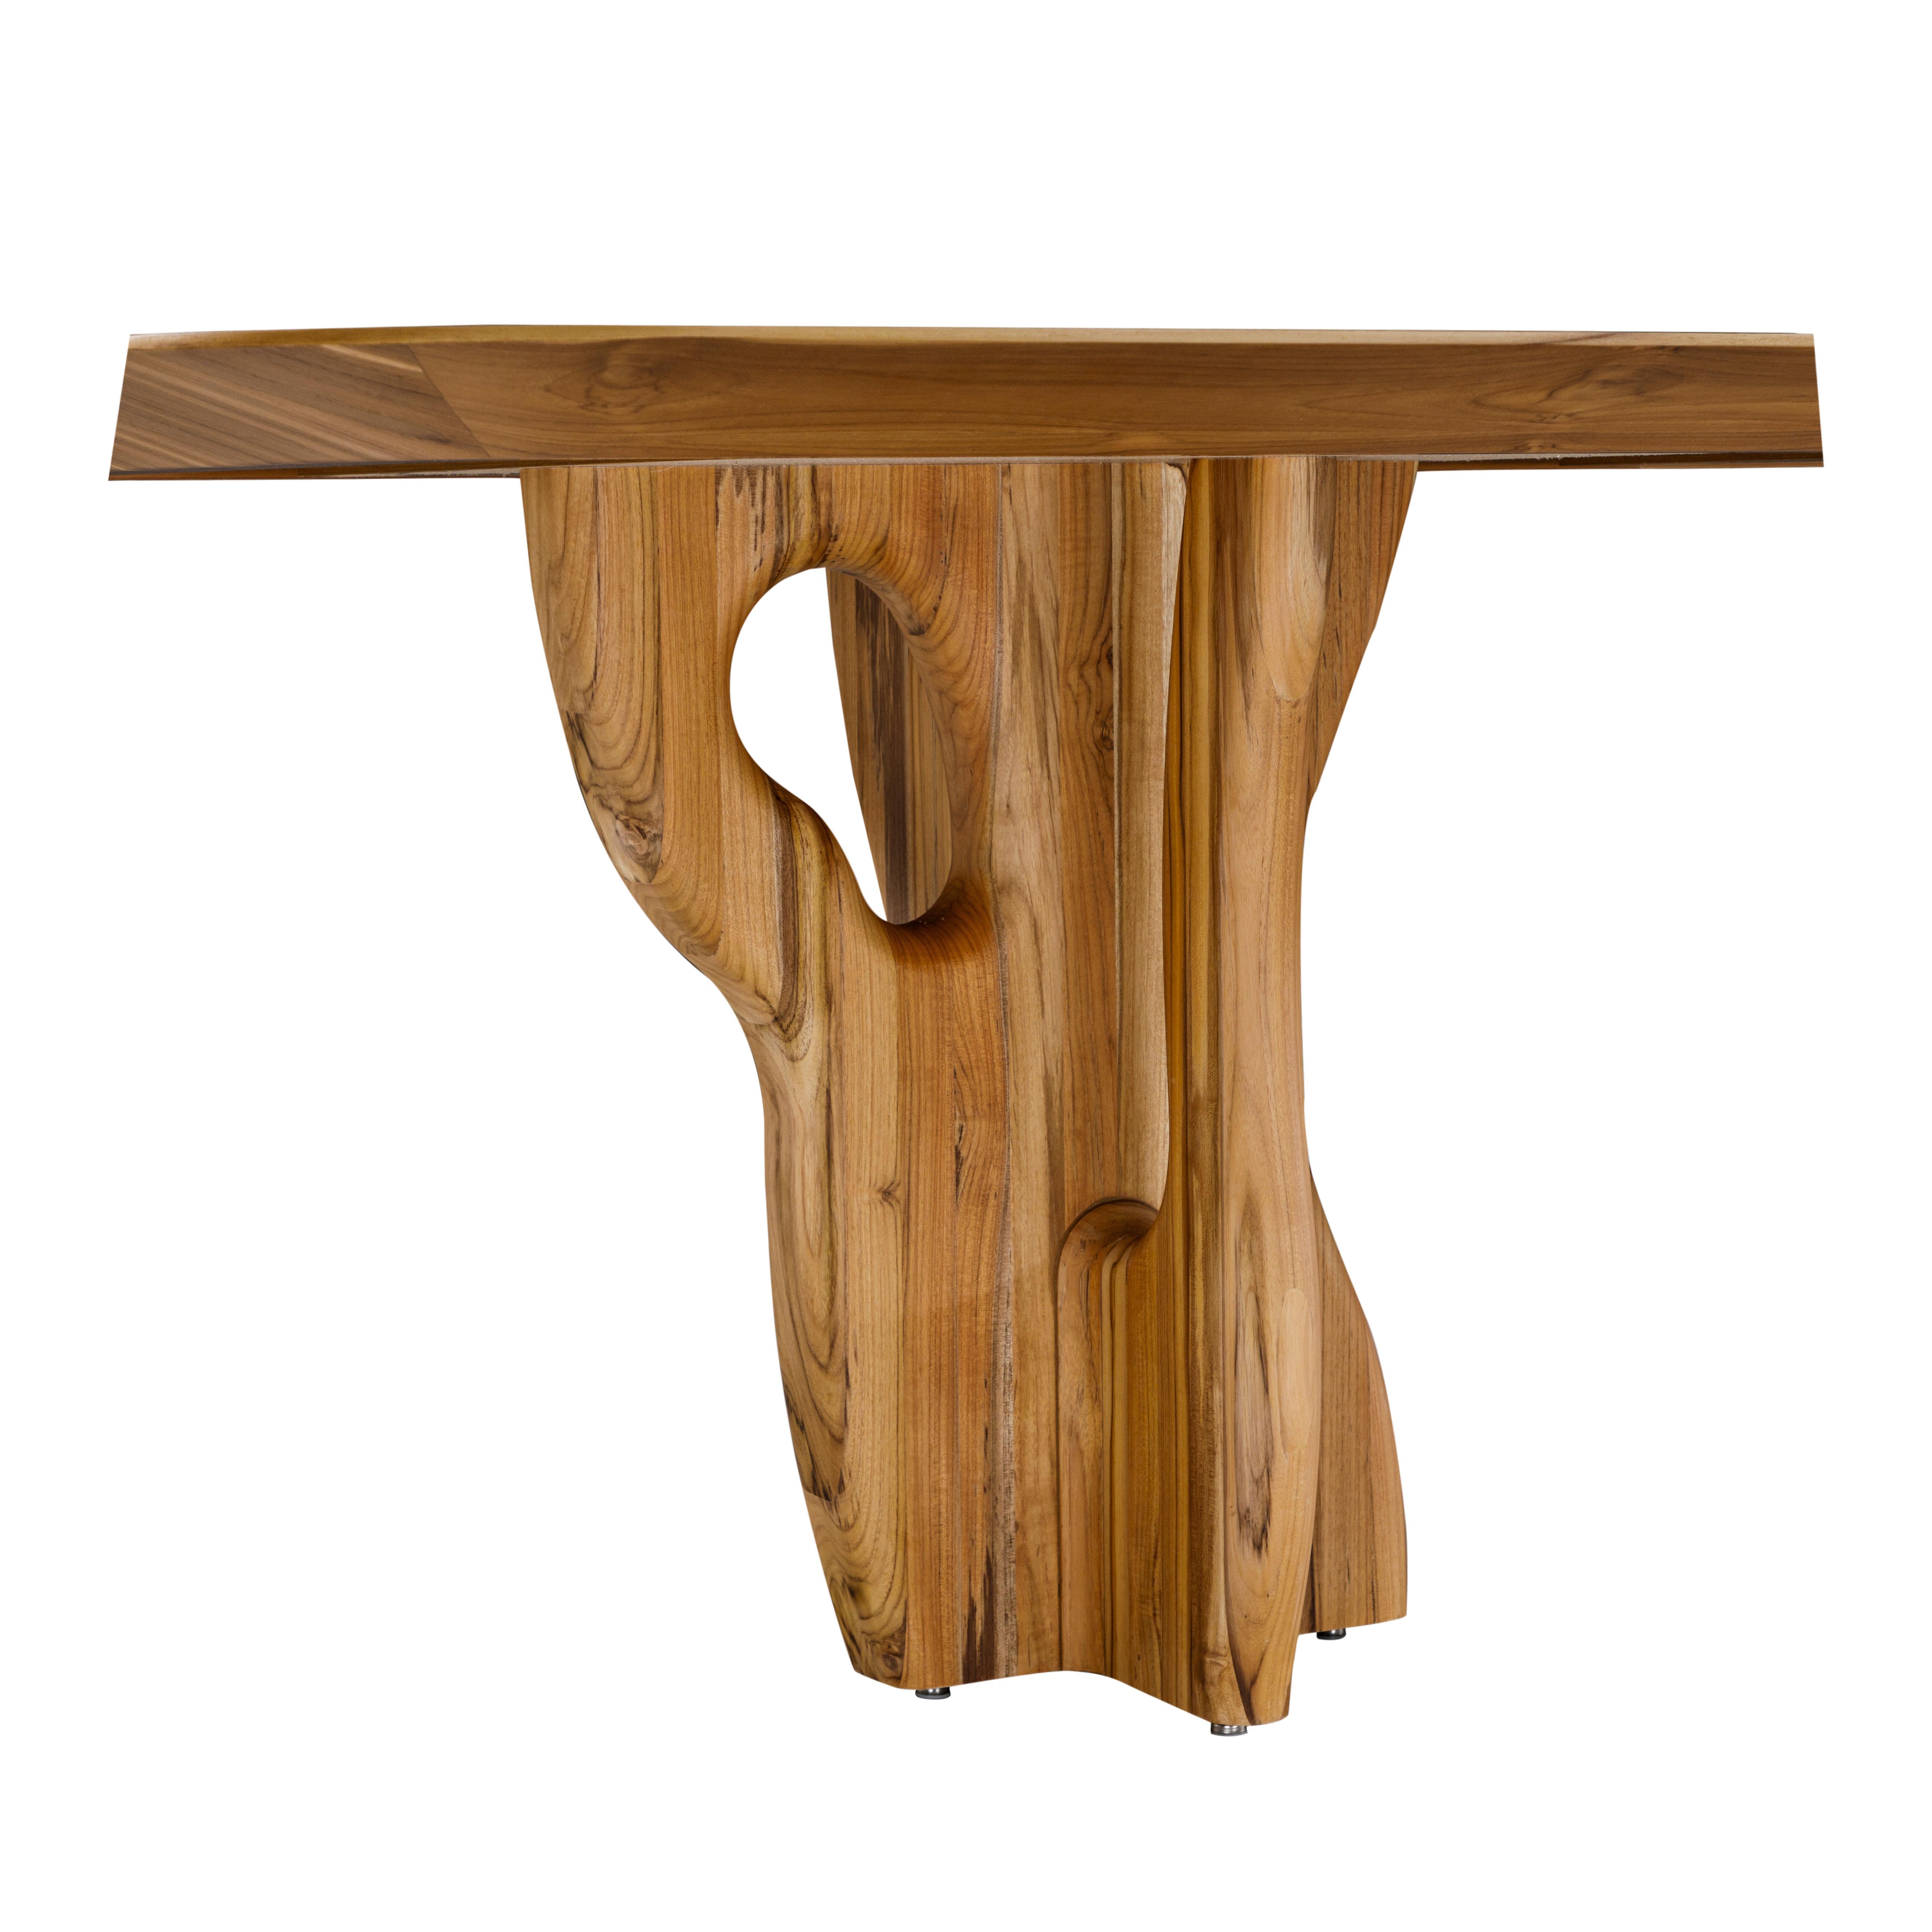 Suma Dining Table with Teak Veneered Top and Organic Solid Wood Legs 110'' In New Condition For Sale In Miami, FL